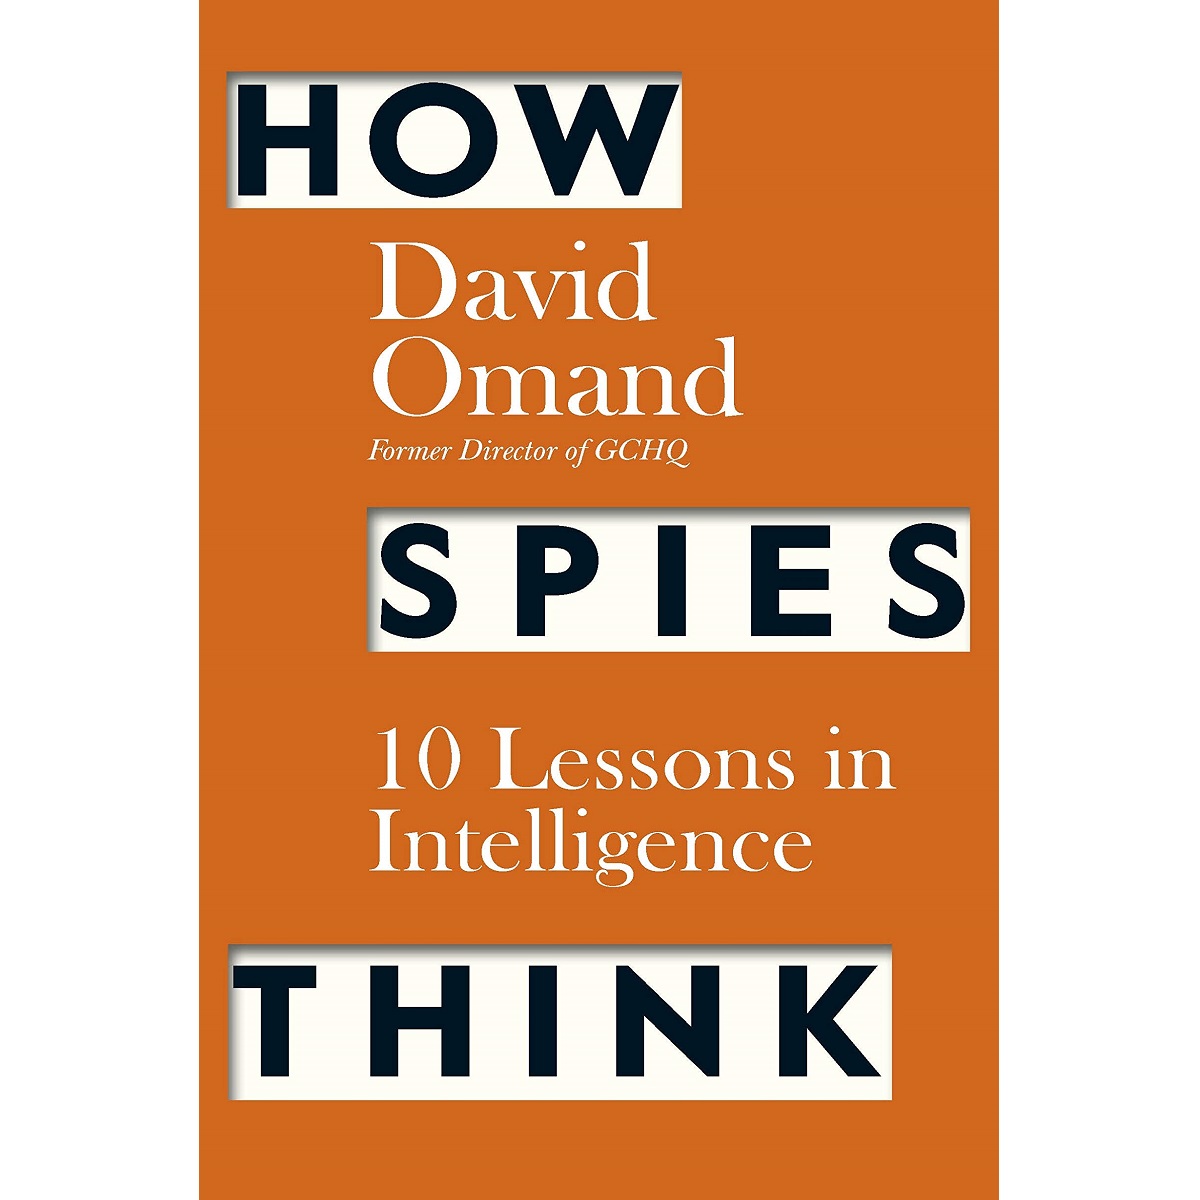 https://www.tarbiyahbooksplus.com/shop/audio-books/self-help/how-spies-think-by-david-omand/